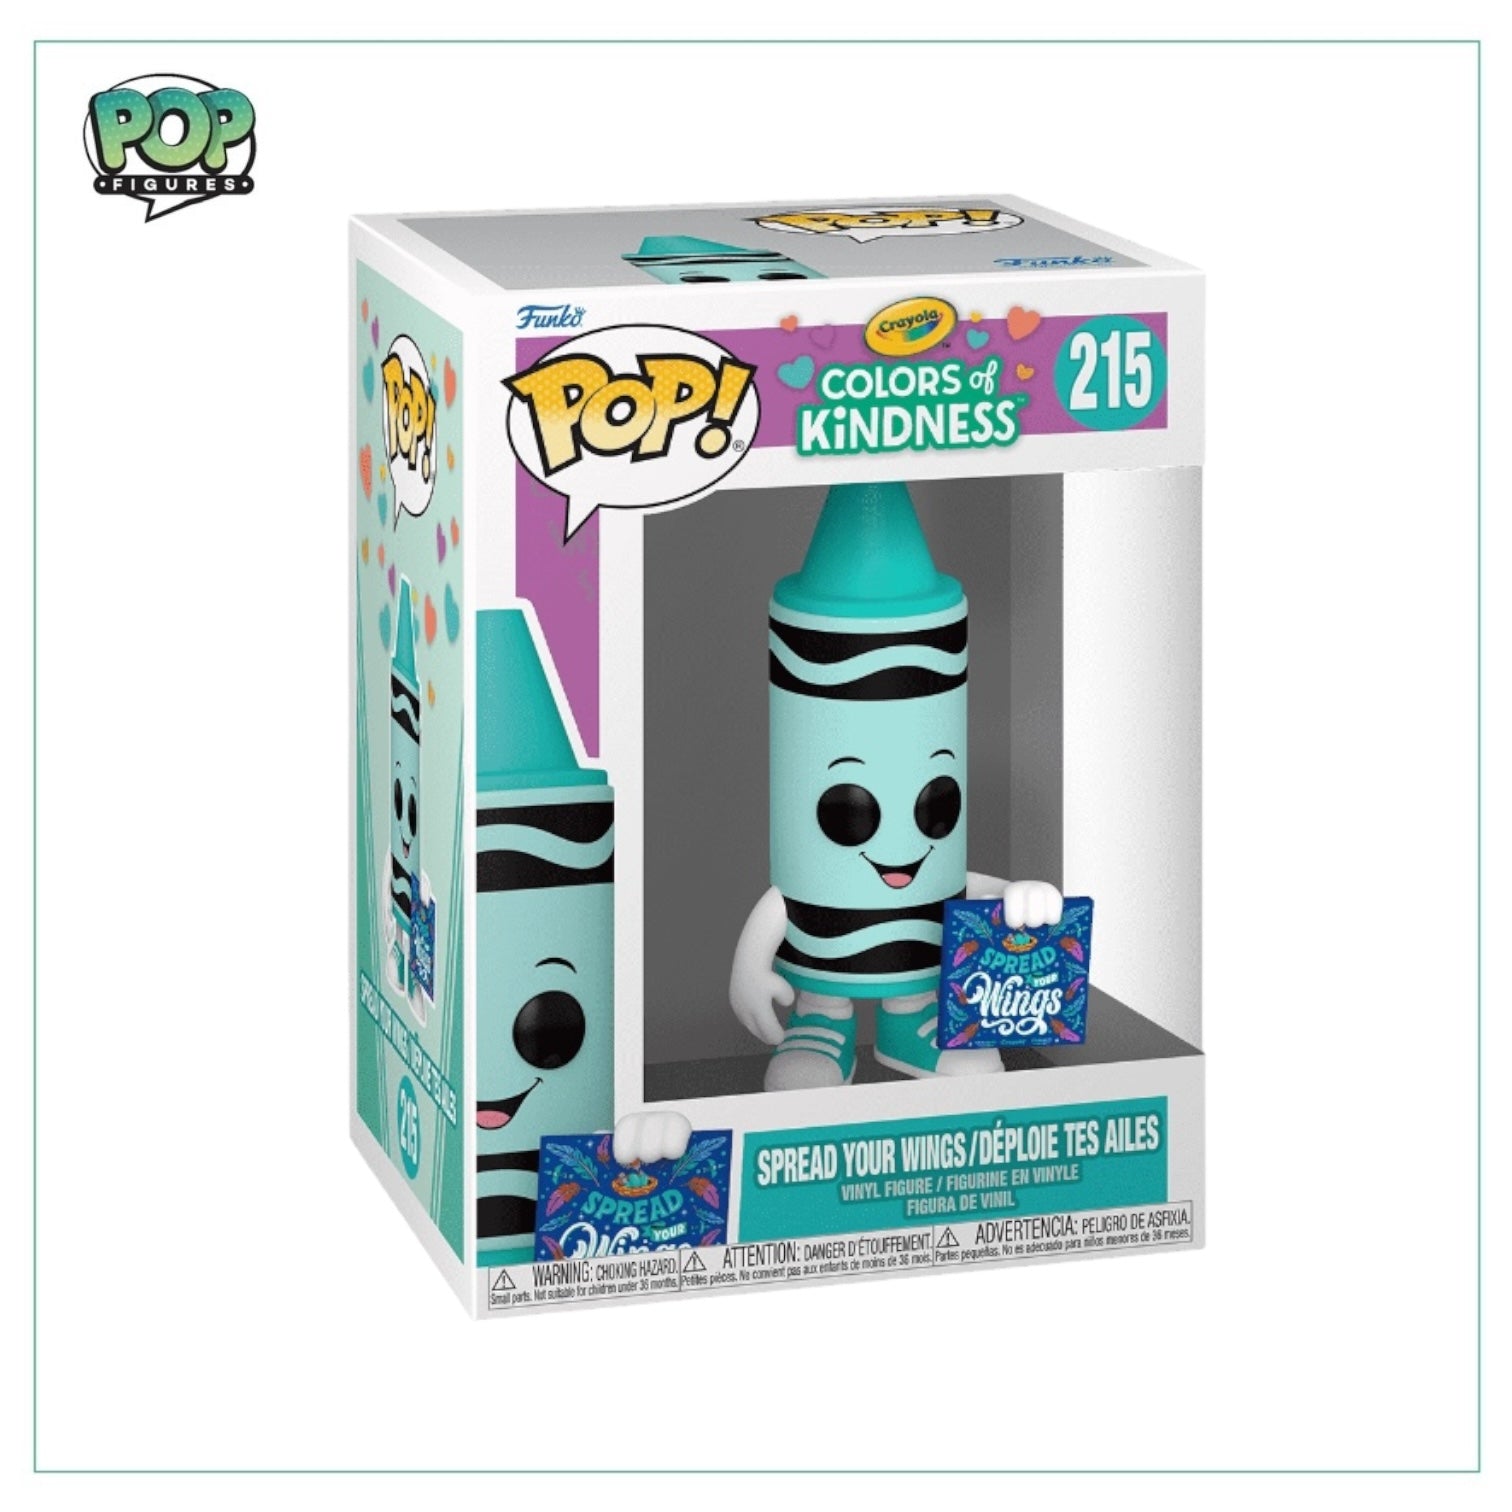 Spread Your Wings/Déploie tes ailes #215 Funko Pop! - Colors of Kindness - Crayola